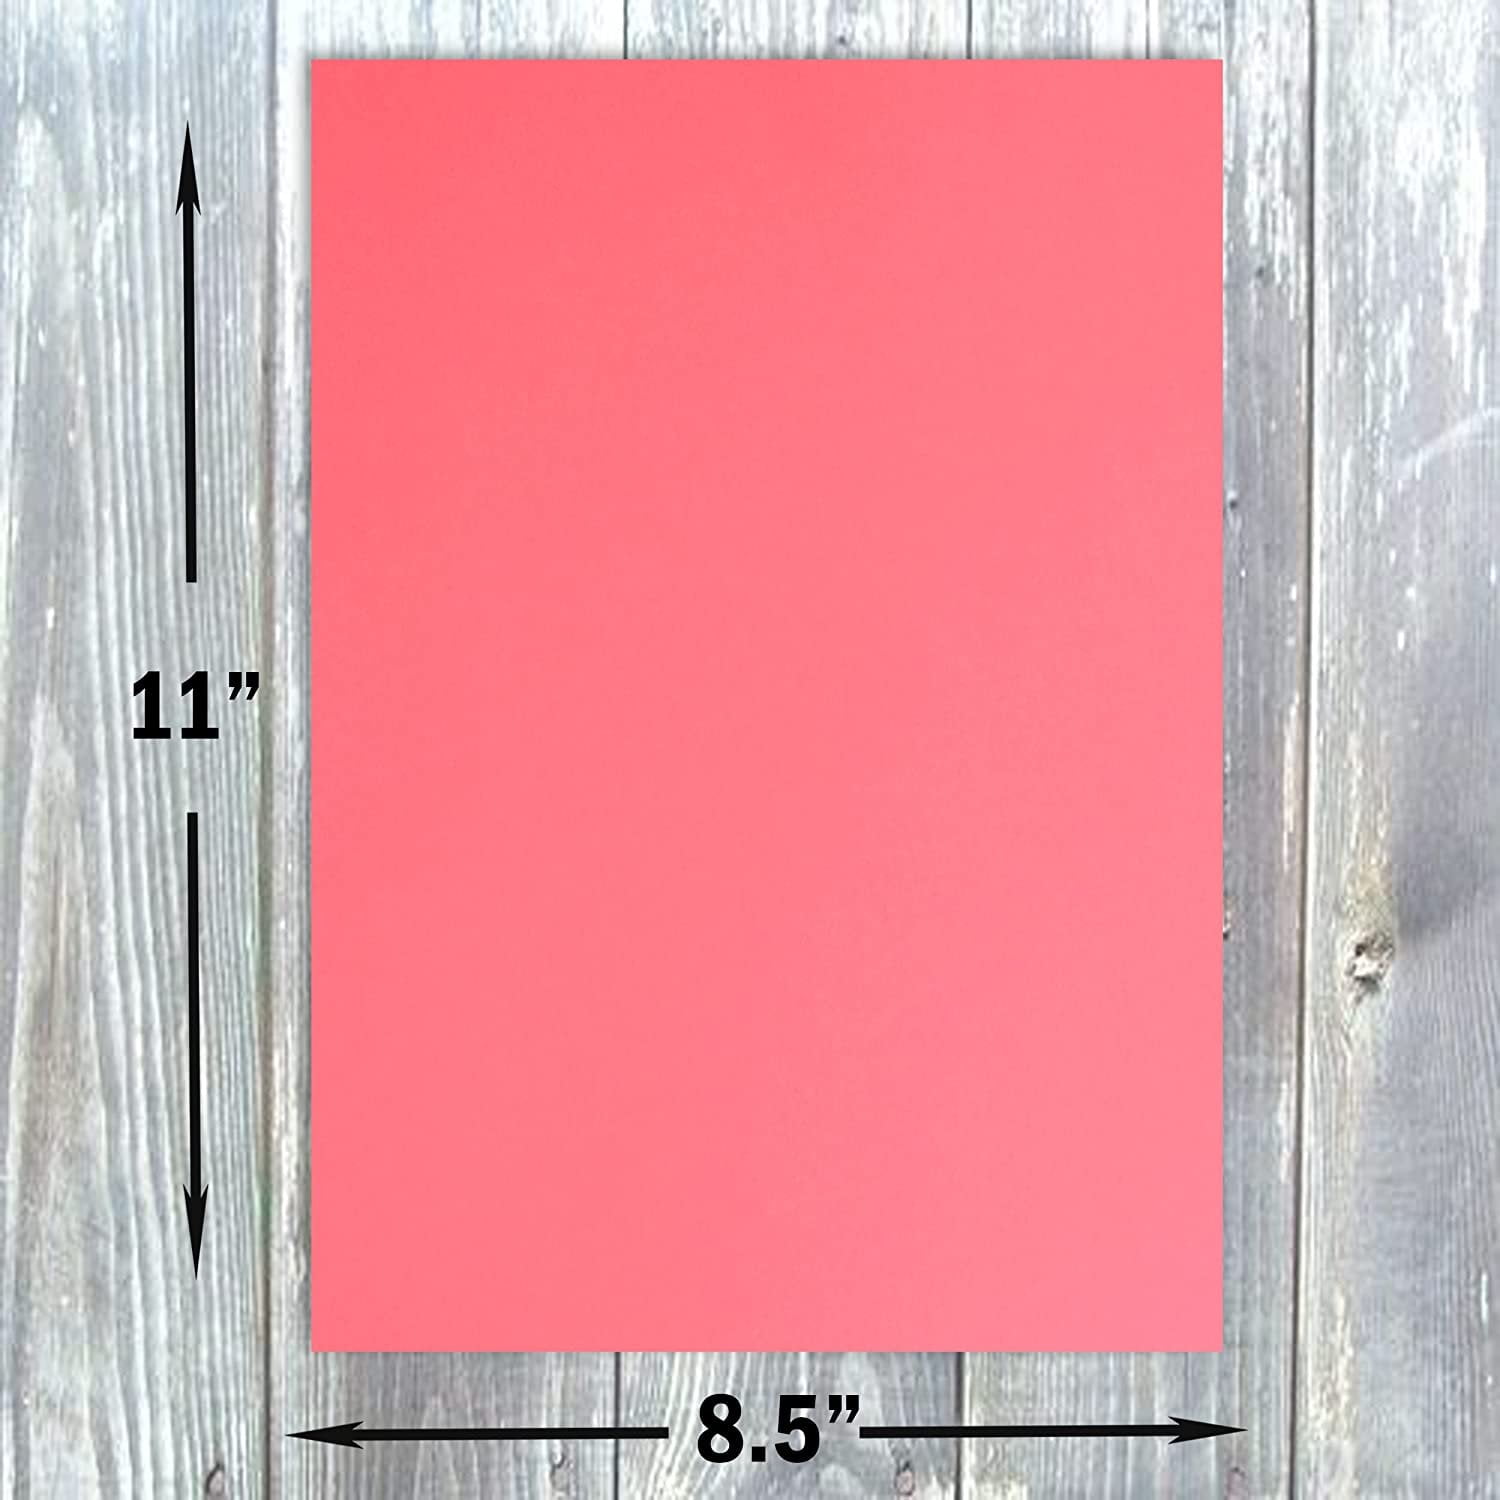 Peppermint – 100 lb Red Cardstock 12x12 Smooth Card Making Paper Single